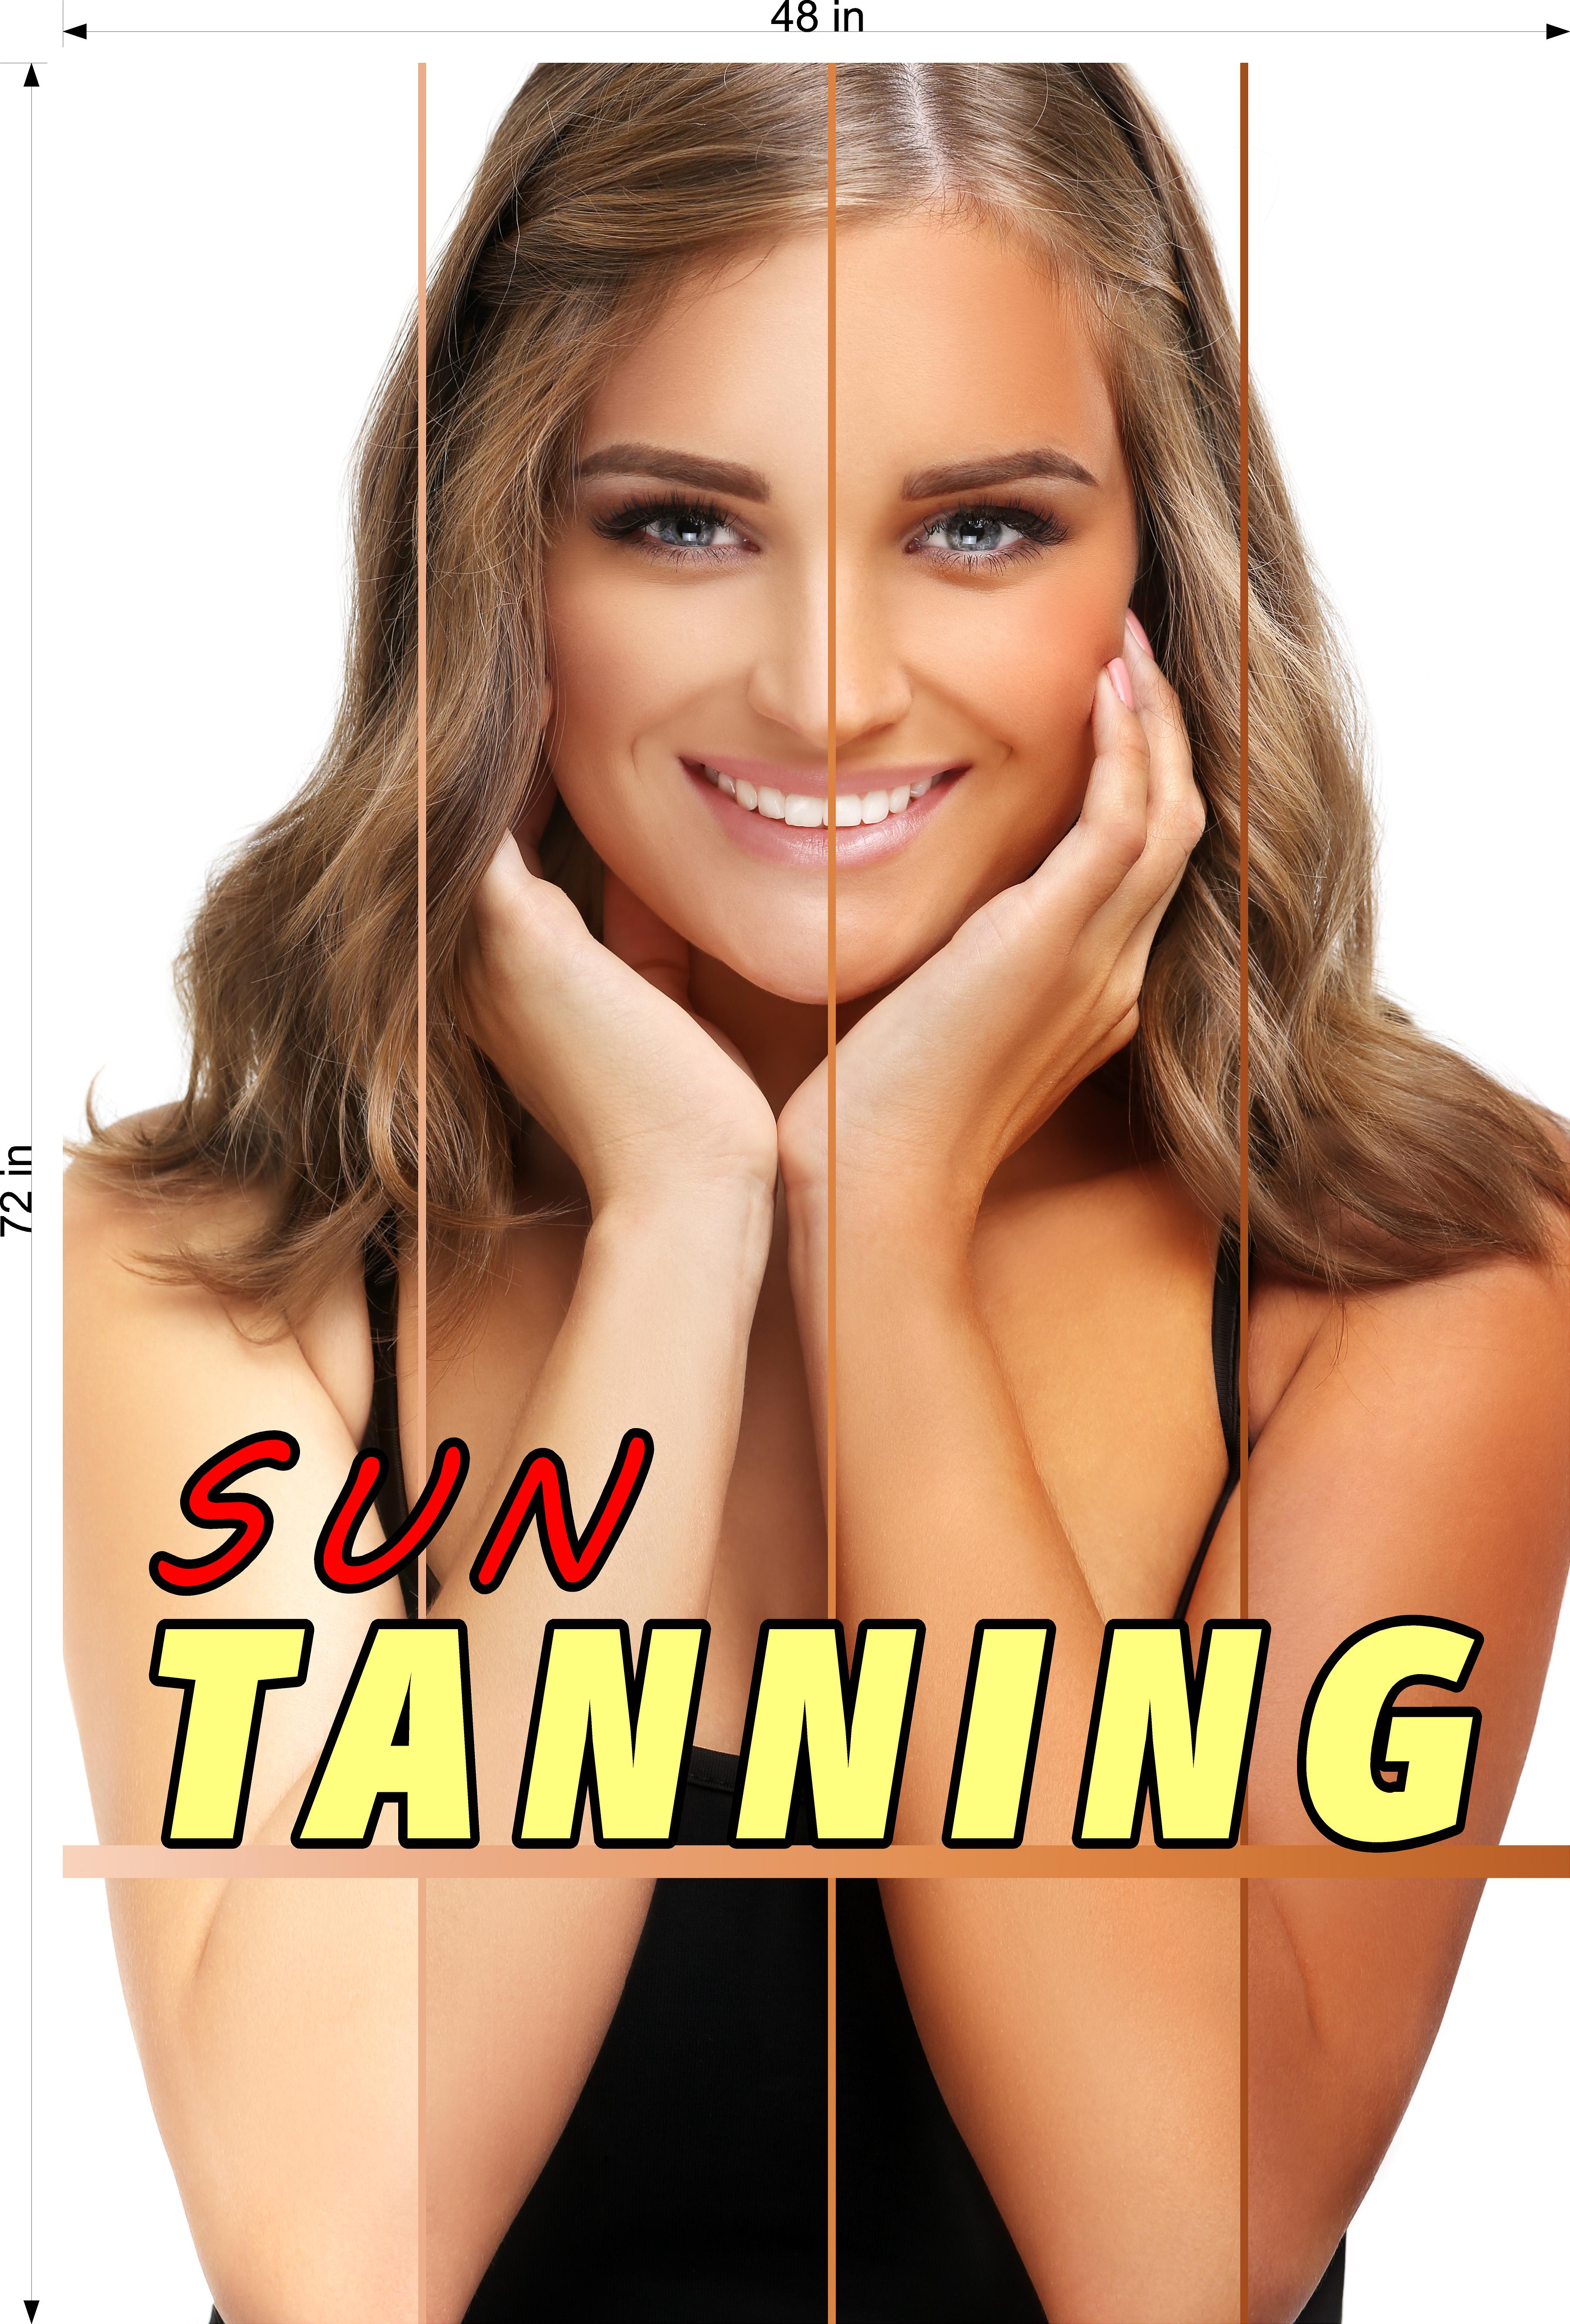 Tanning 01 Photo-Realistic Paper Poster Premium Interior Inside Sign Wall Window Non-Laminated Vertical